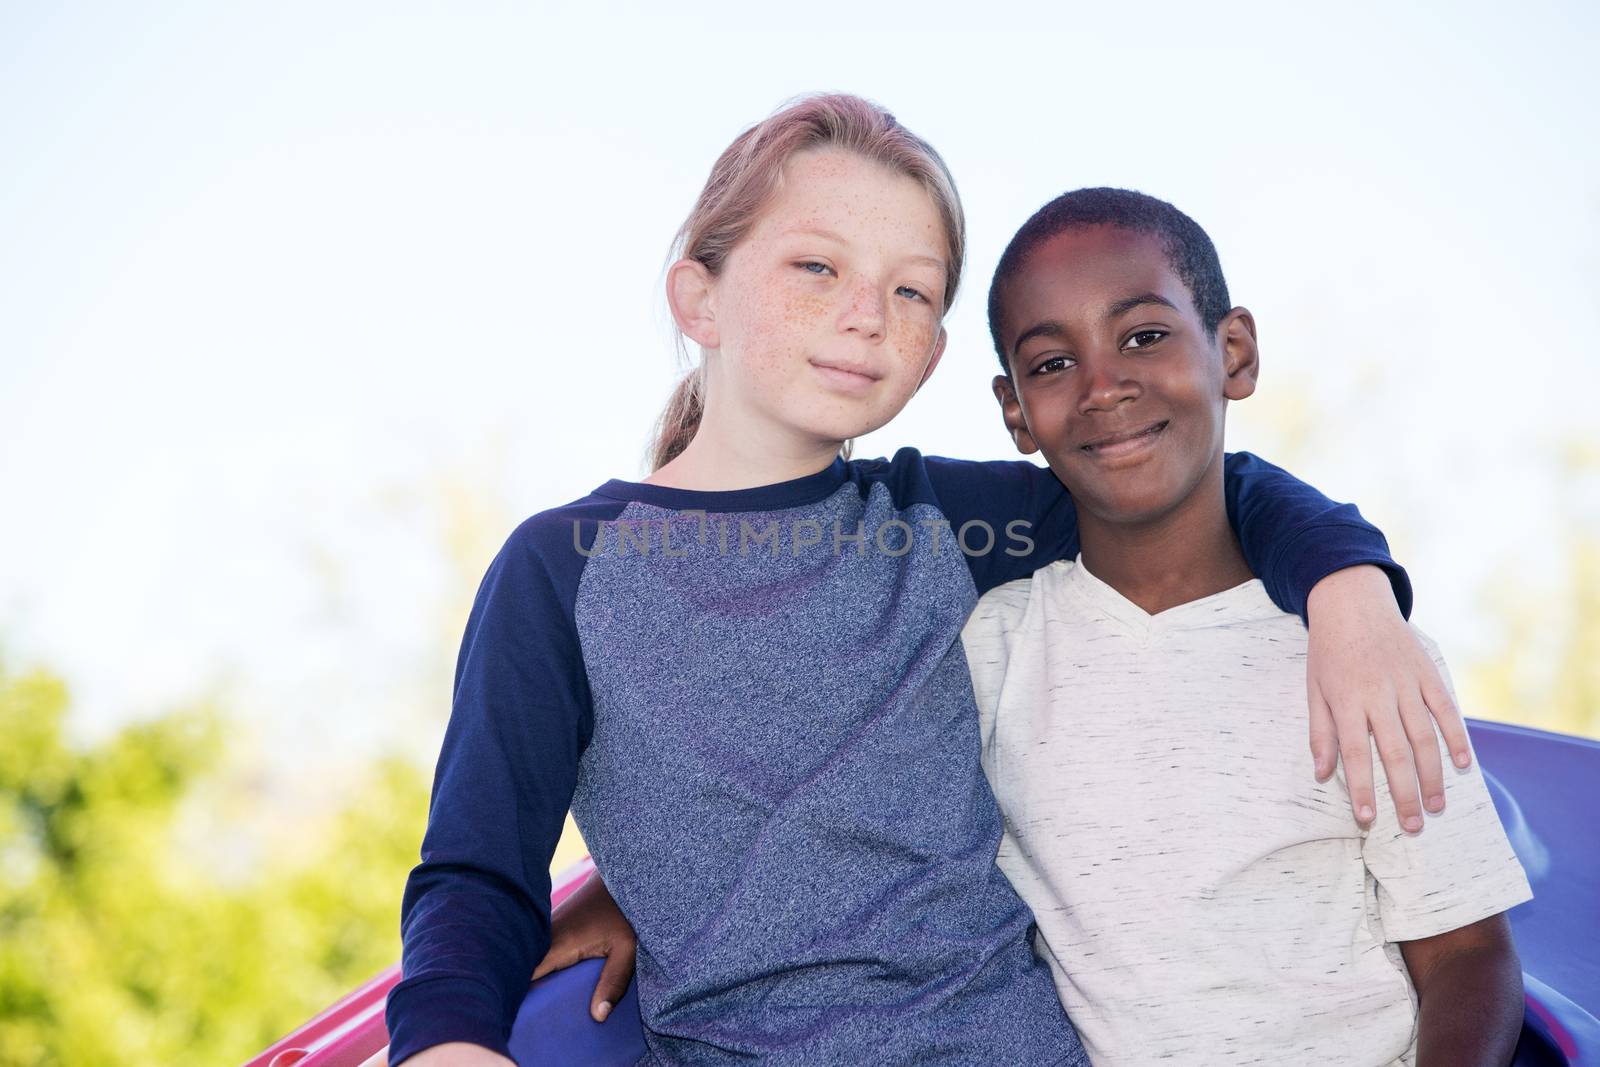 Calm cheerful boy with cute adopted brother embracing outside